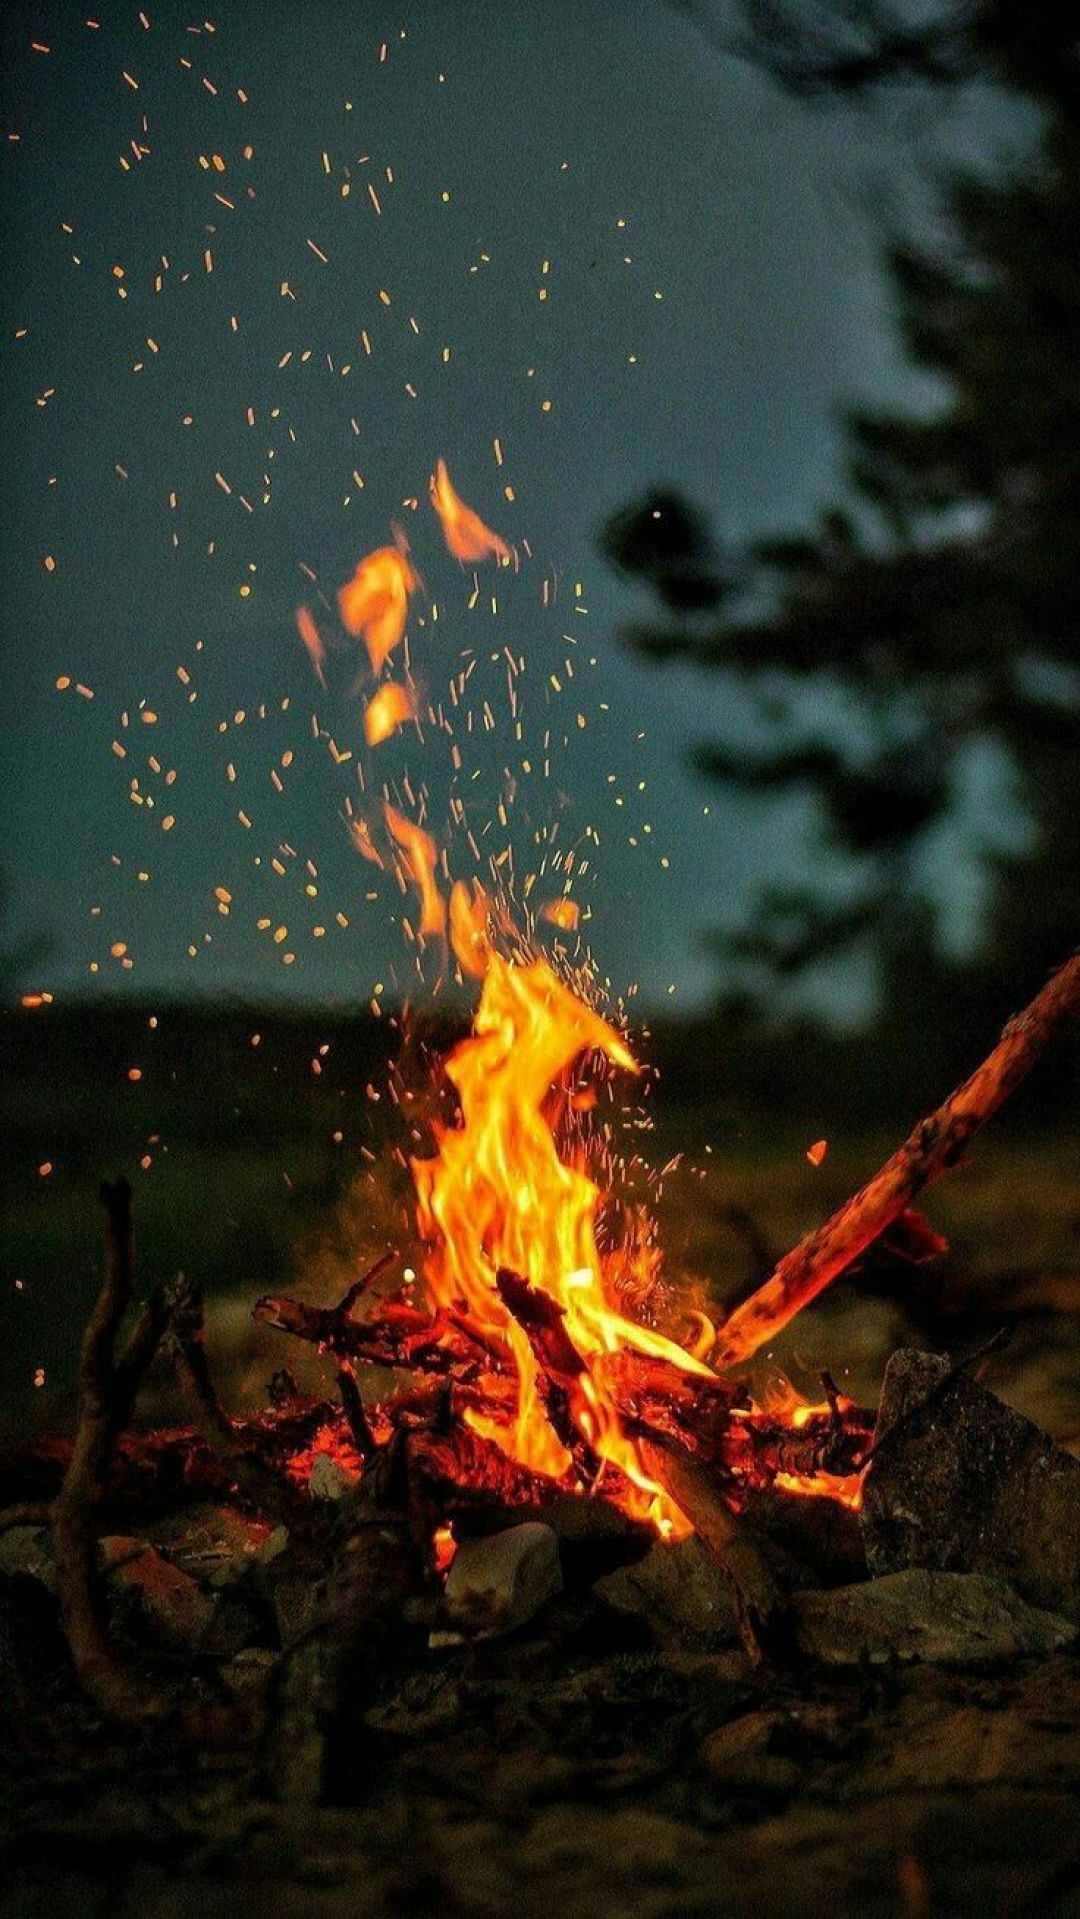 Aesthetic Fire HD Wallpaper (Desktop Background / Android / iPhone) (1080p, 4k) (1080x1919) (2020)